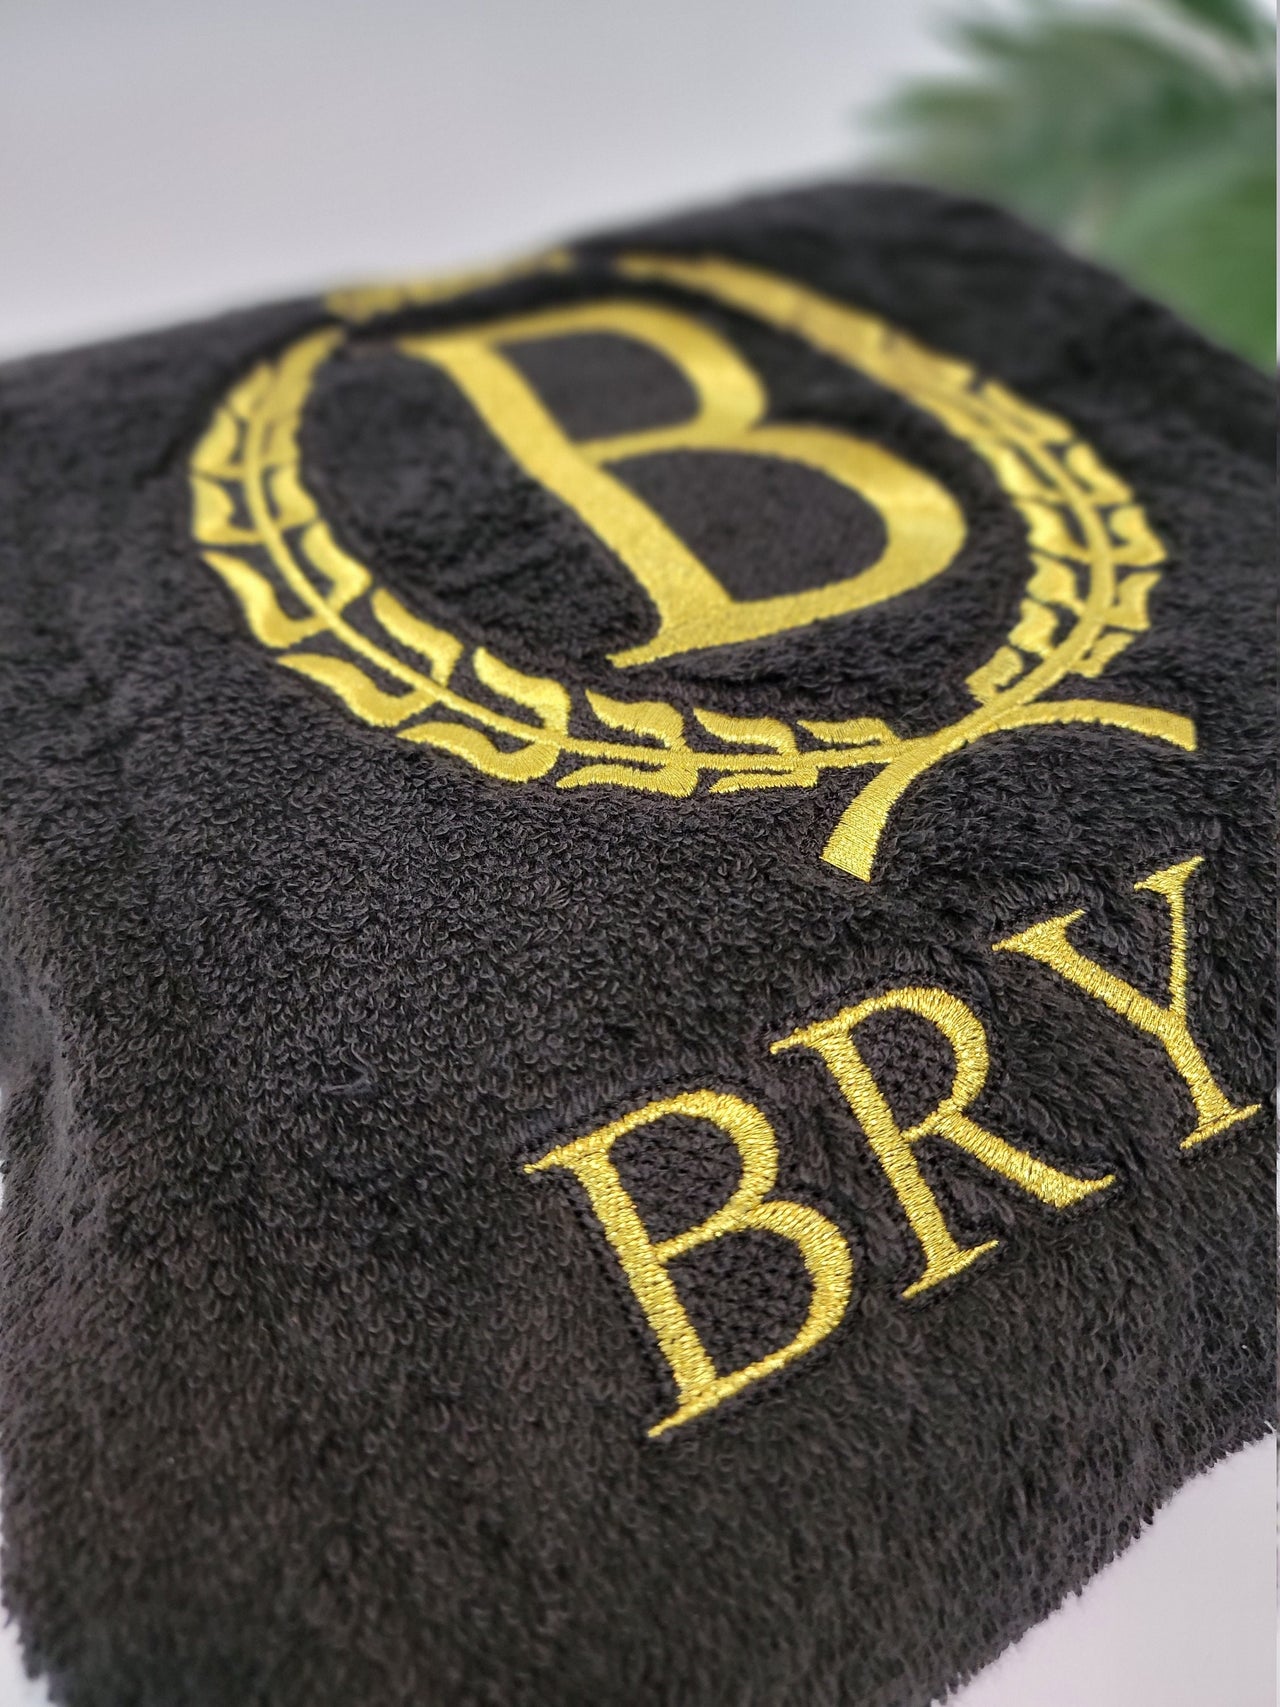 Personalized Bath Towel - Embroidered Monogrammed Towel with King Crown - Custom Embroidered Gift for Men- Embroidered Towel - Black Towel